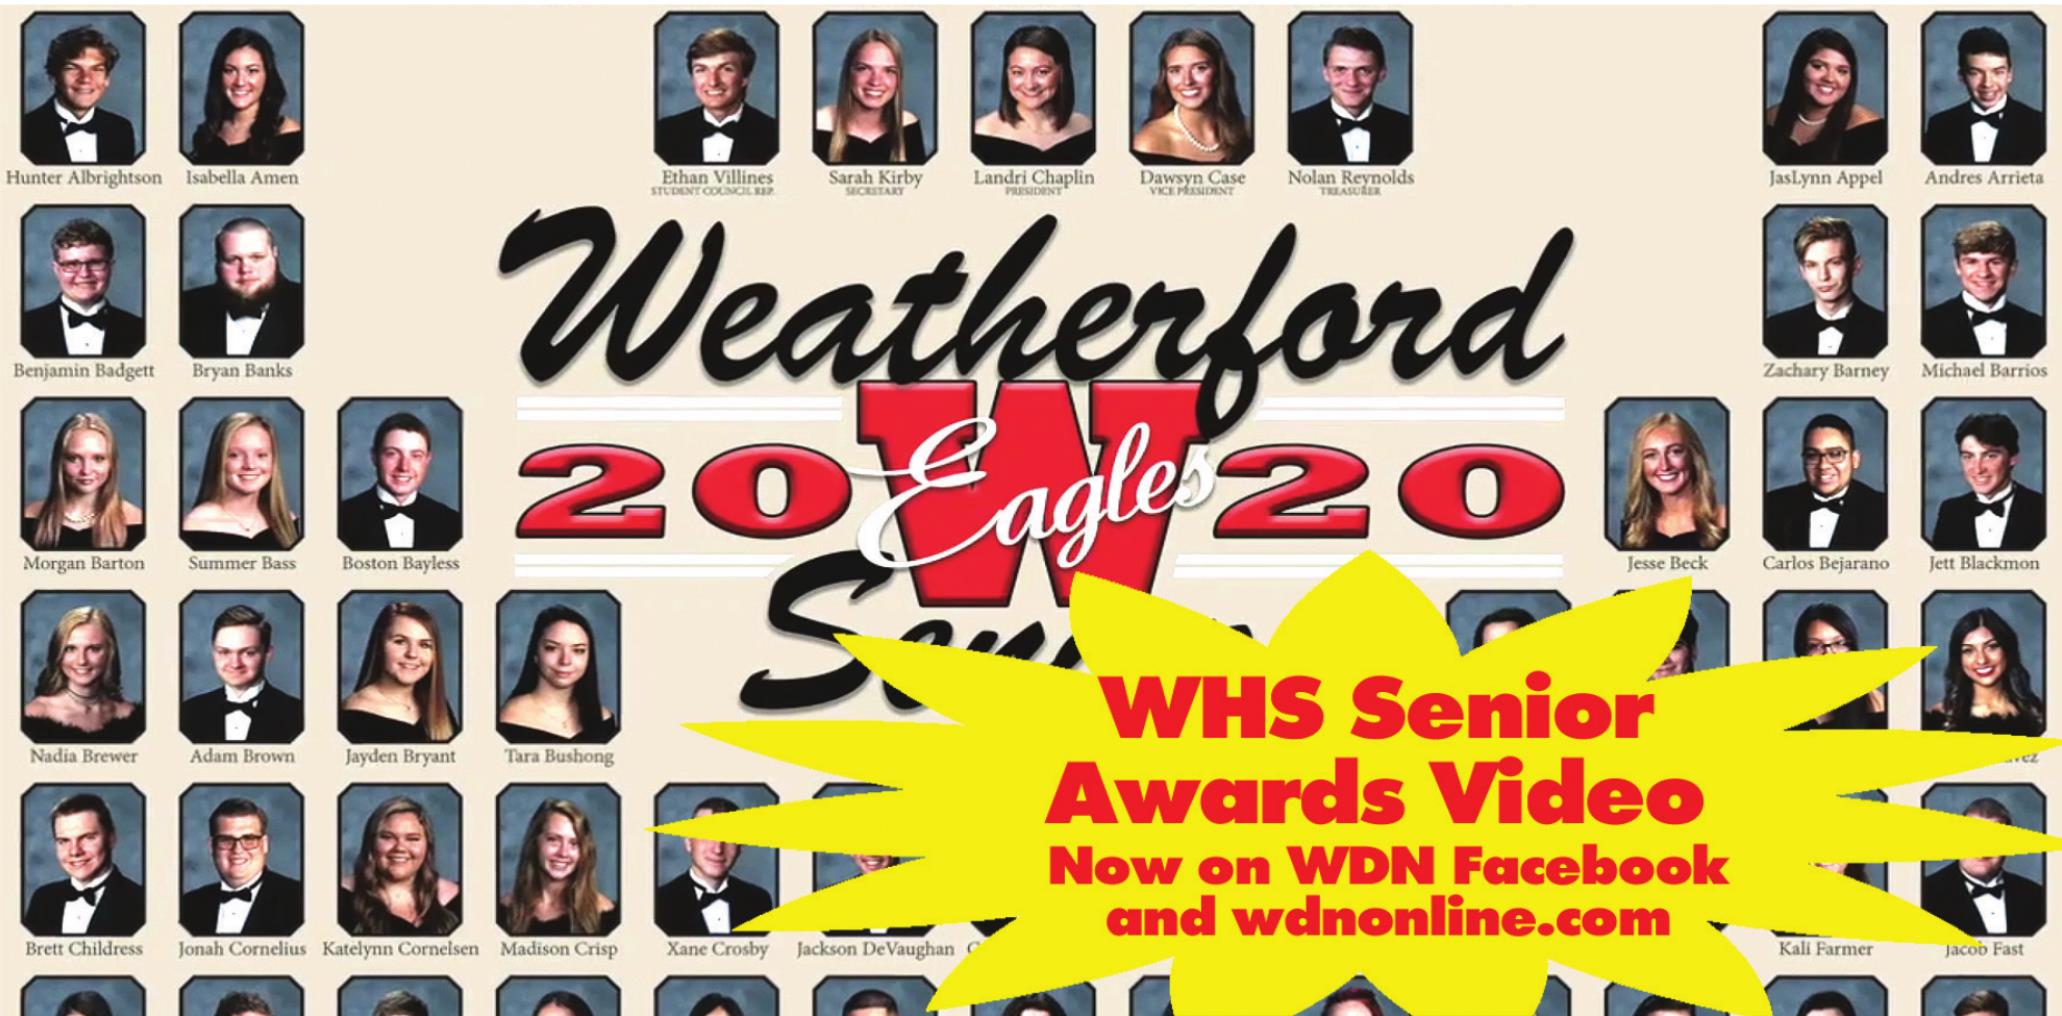 A total of 89 Weatherford High School graduates received $914,626 in a variety of awards, scholarships and other honors, announced on the award’s video on the WDN news site.Provided